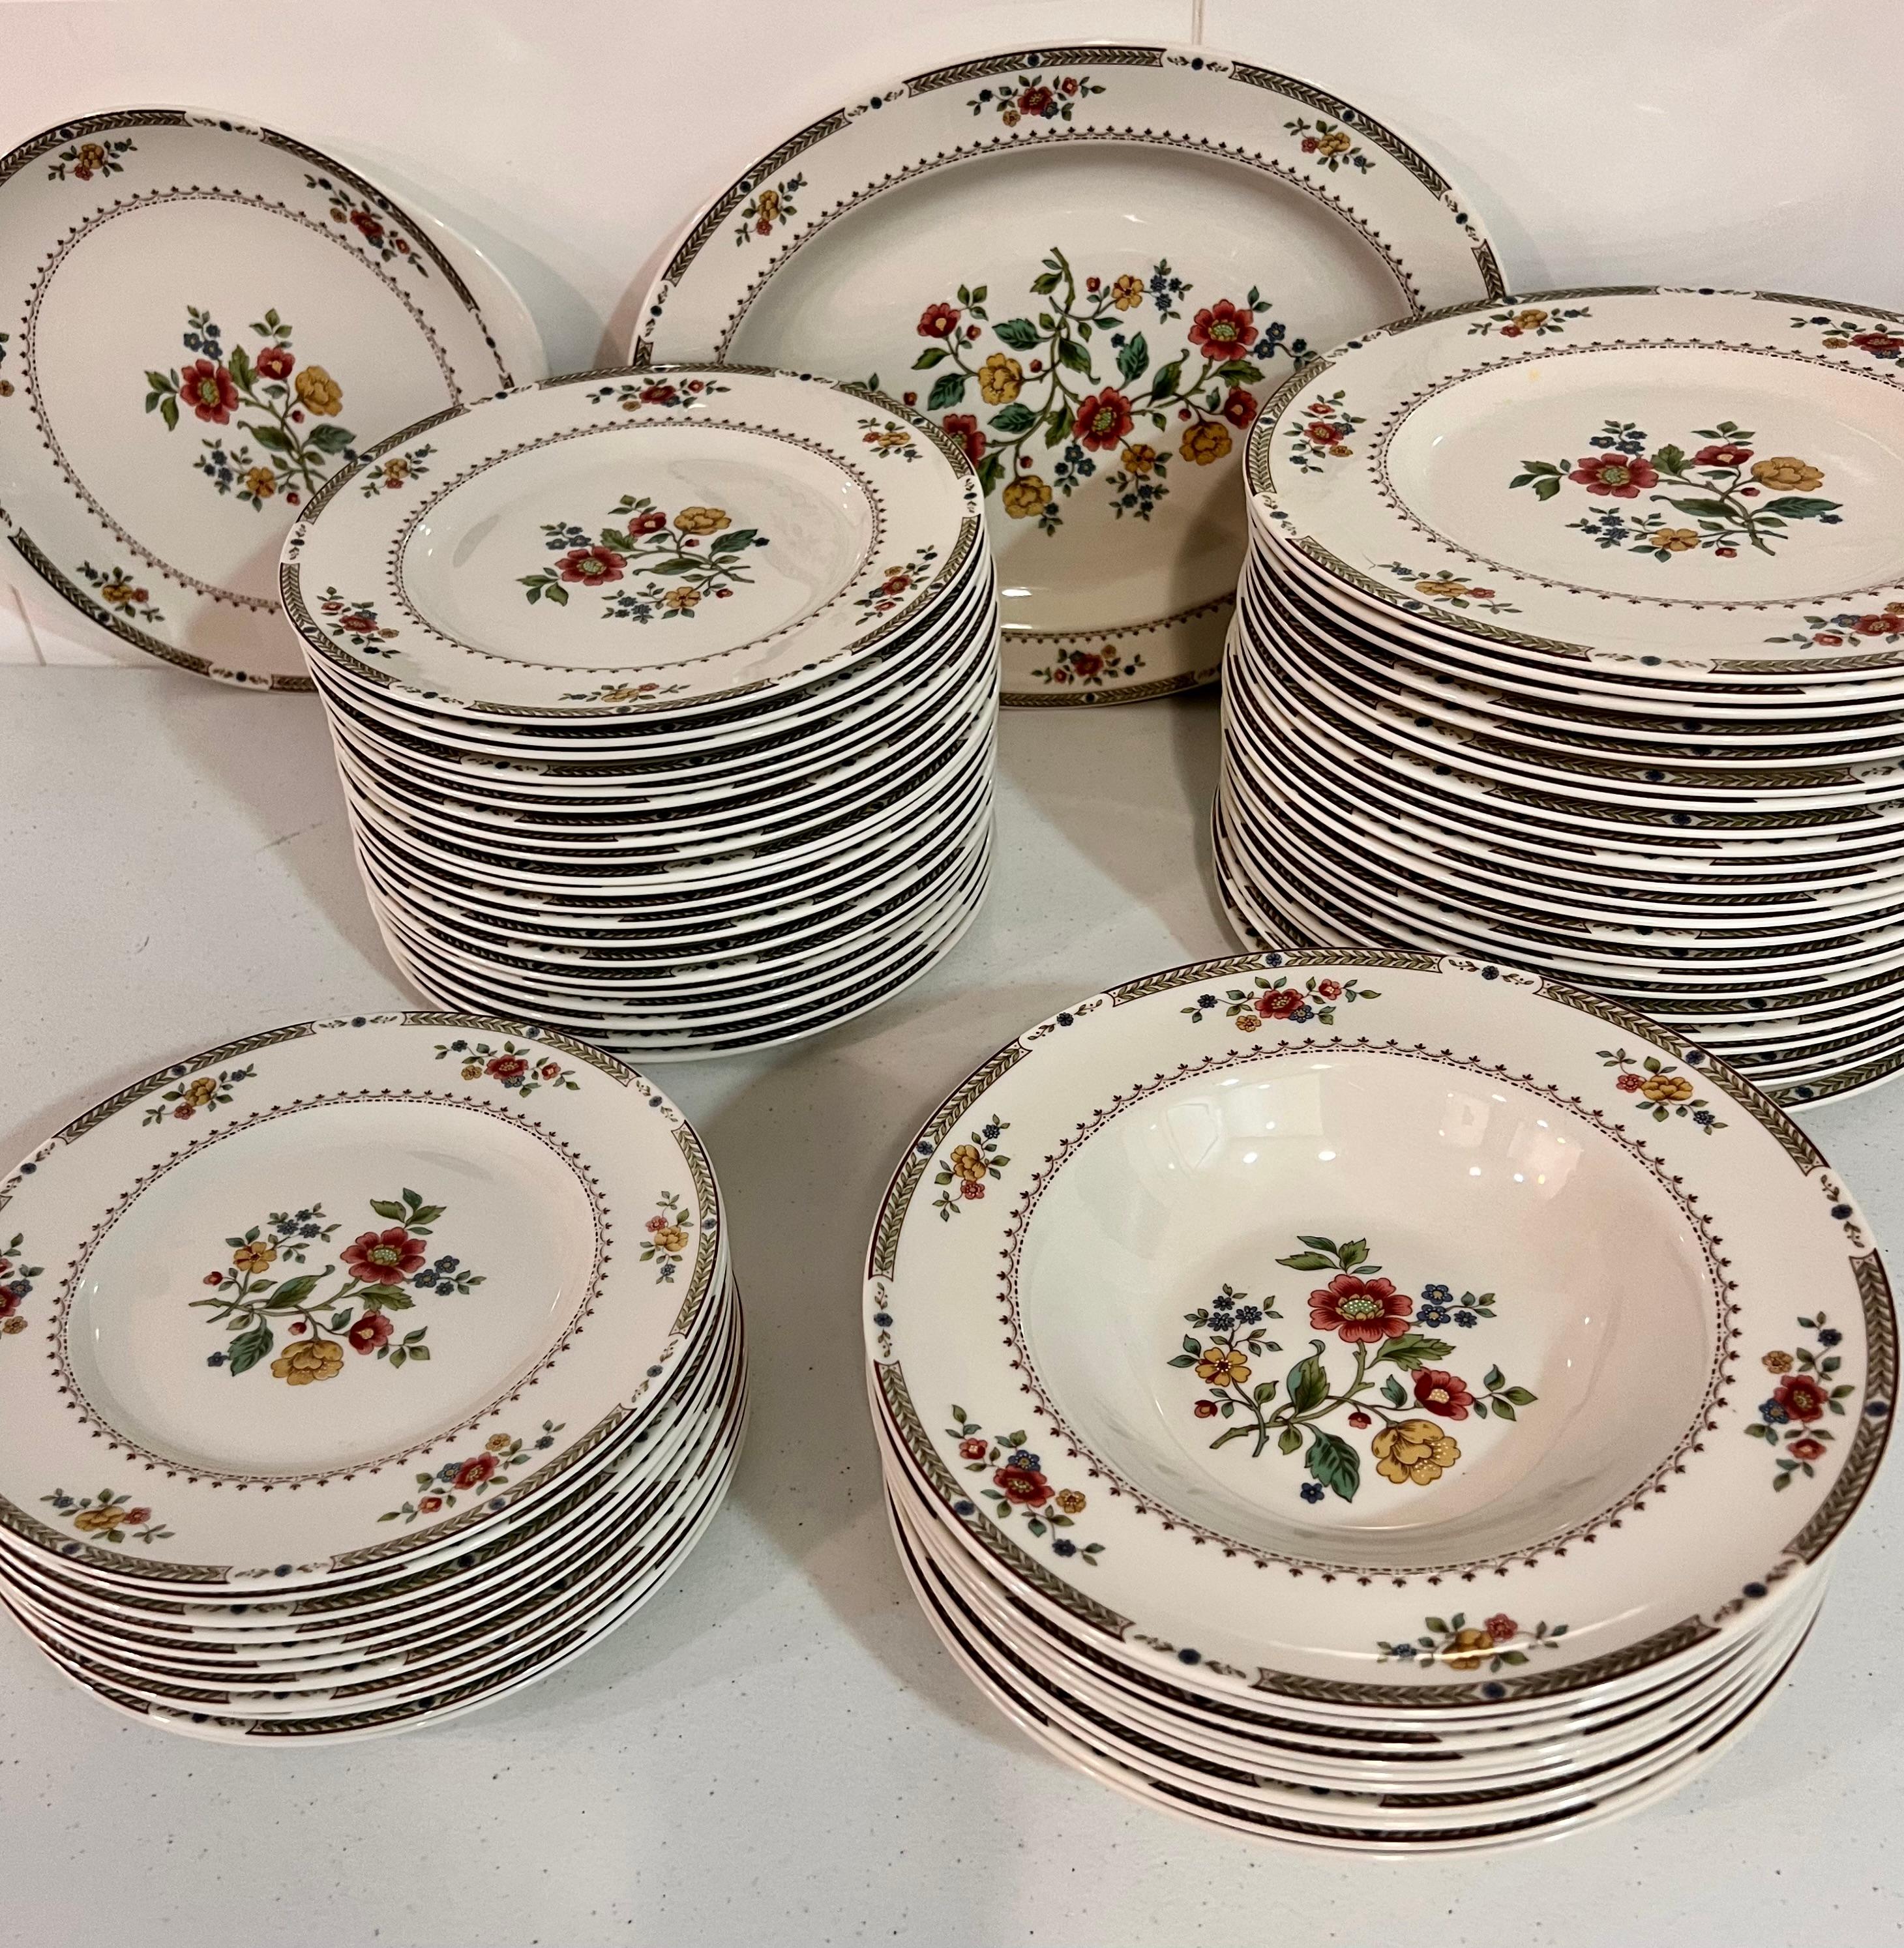 Tureen & Lid Replacement Flatware & dinnerware Kingswood by Royal Doulton

Hand Wash

Request info for flatware and diner ware 
We sell them individually or in sets
We have a full collection that originally was for 24 servings 

This Kingswood